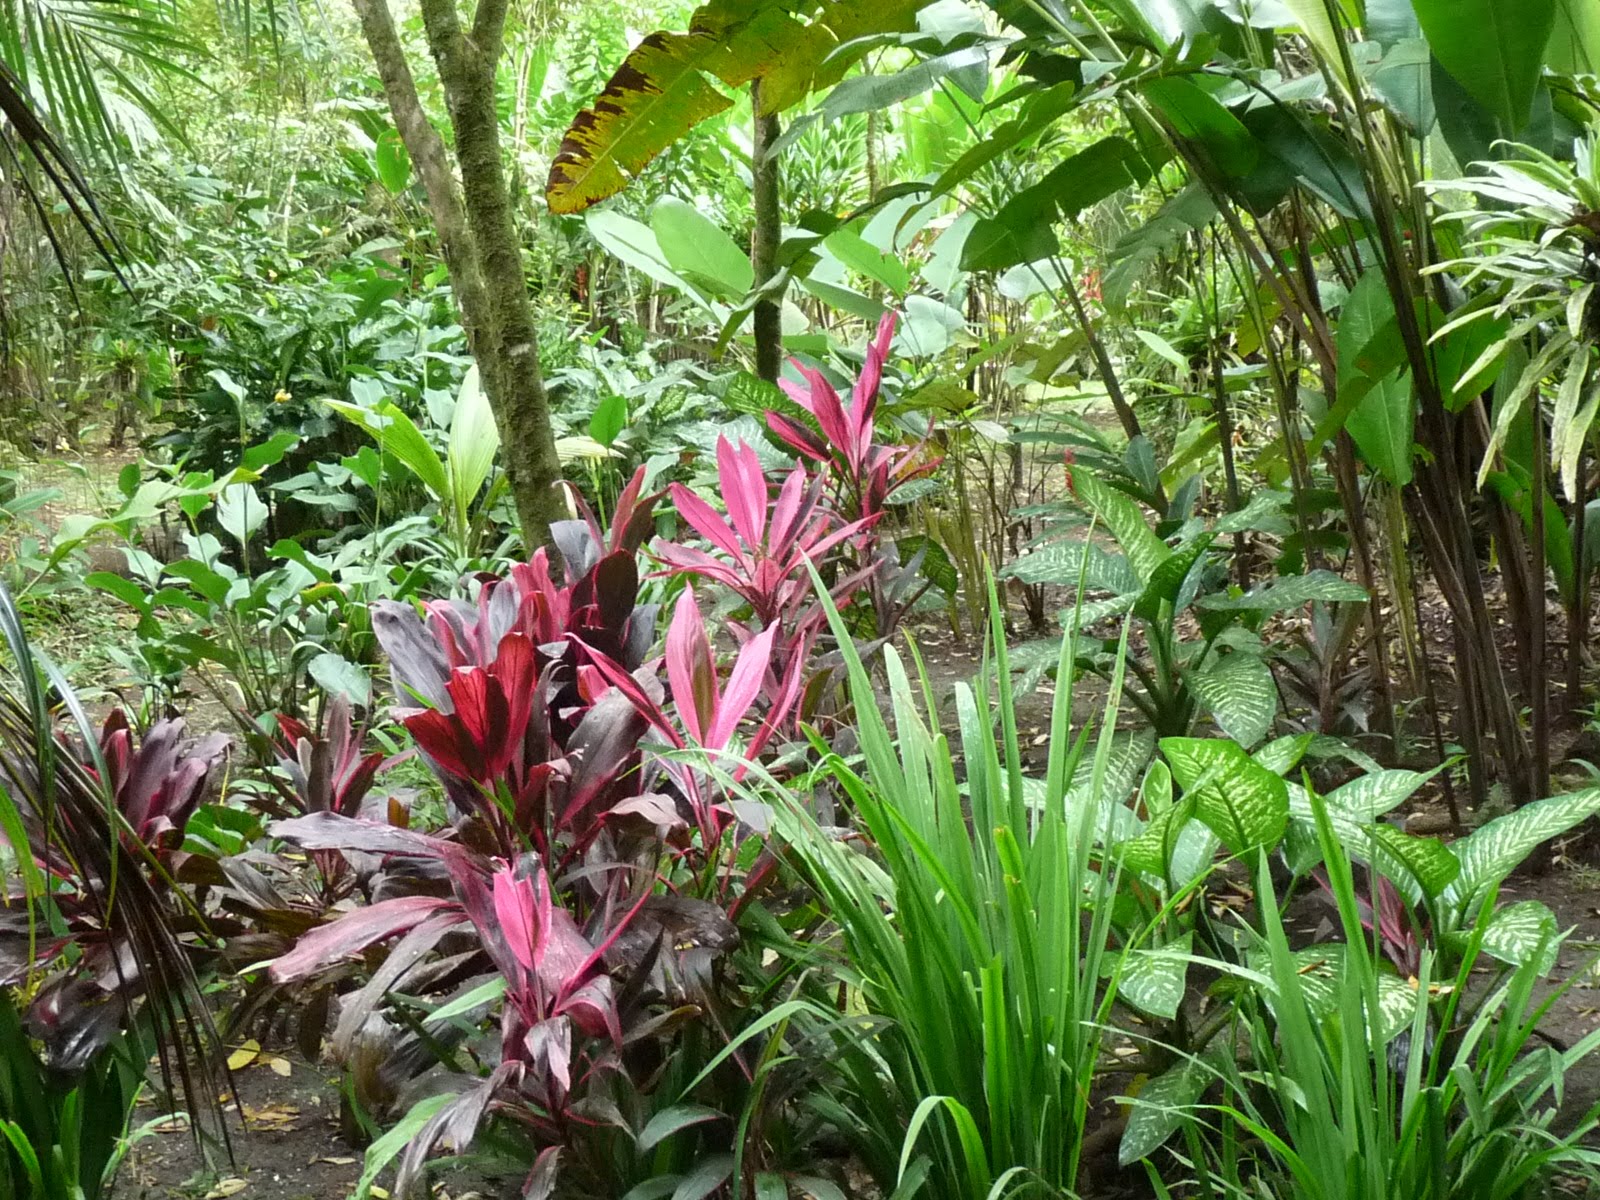 Great Pictures Of Tropical Plants In Tropicalgarden on Home Design ...